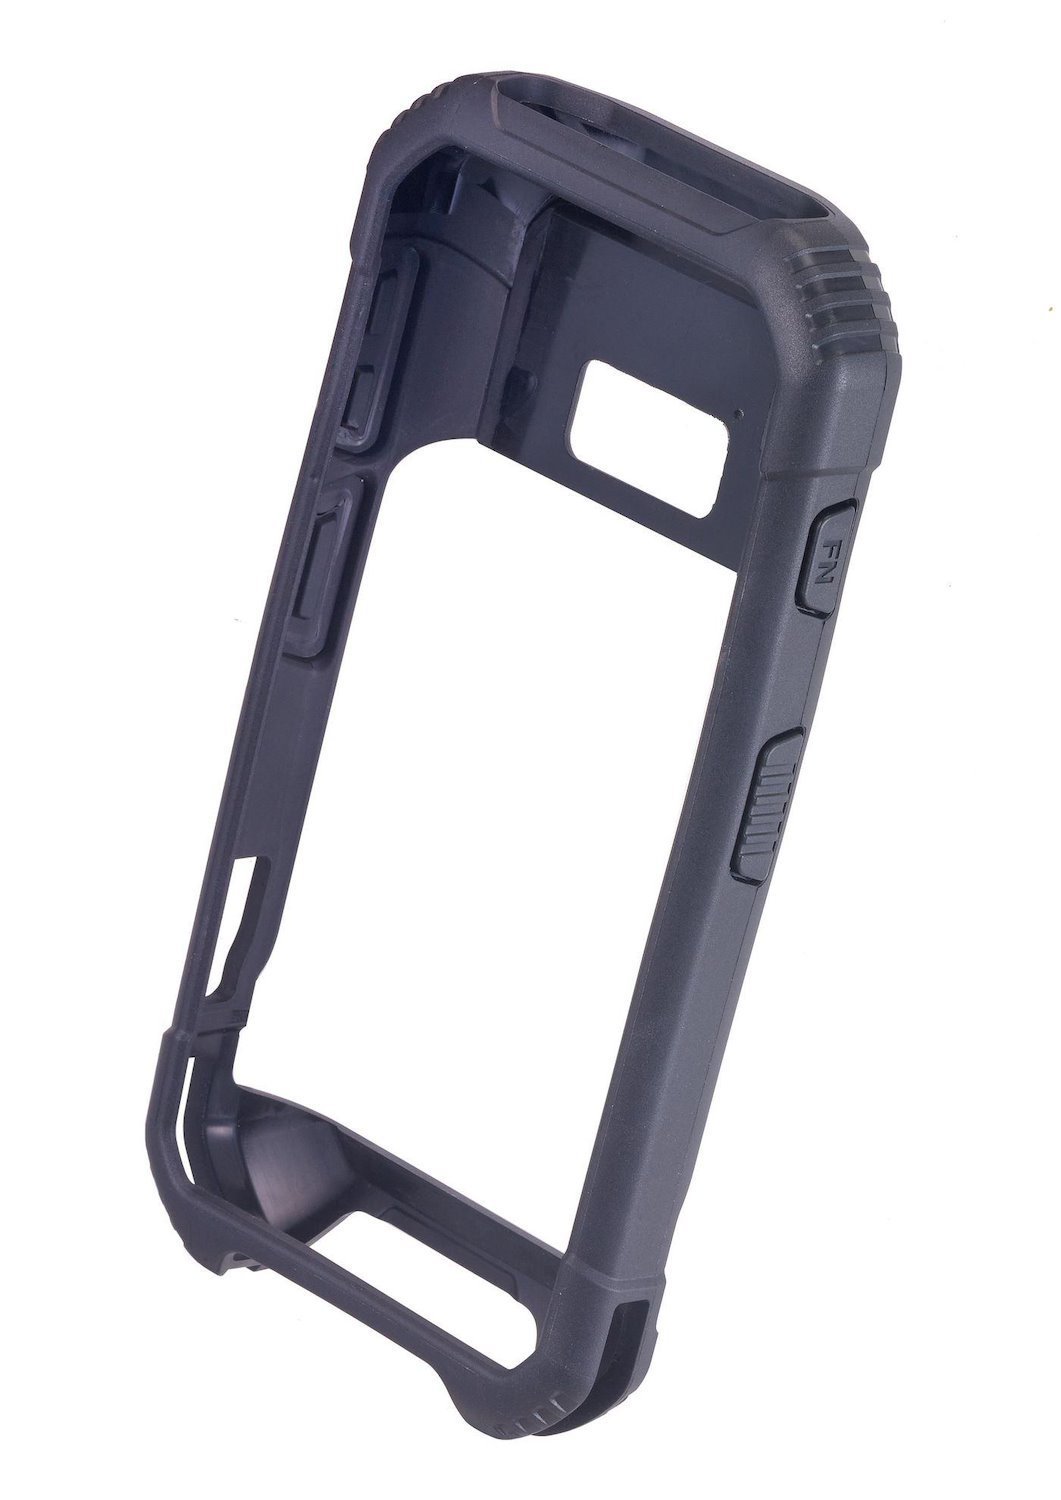 CipherLab PRS3500X01511 Handheld Mobile Computer Case (Protective Rubber Boot For - RS35 Series)